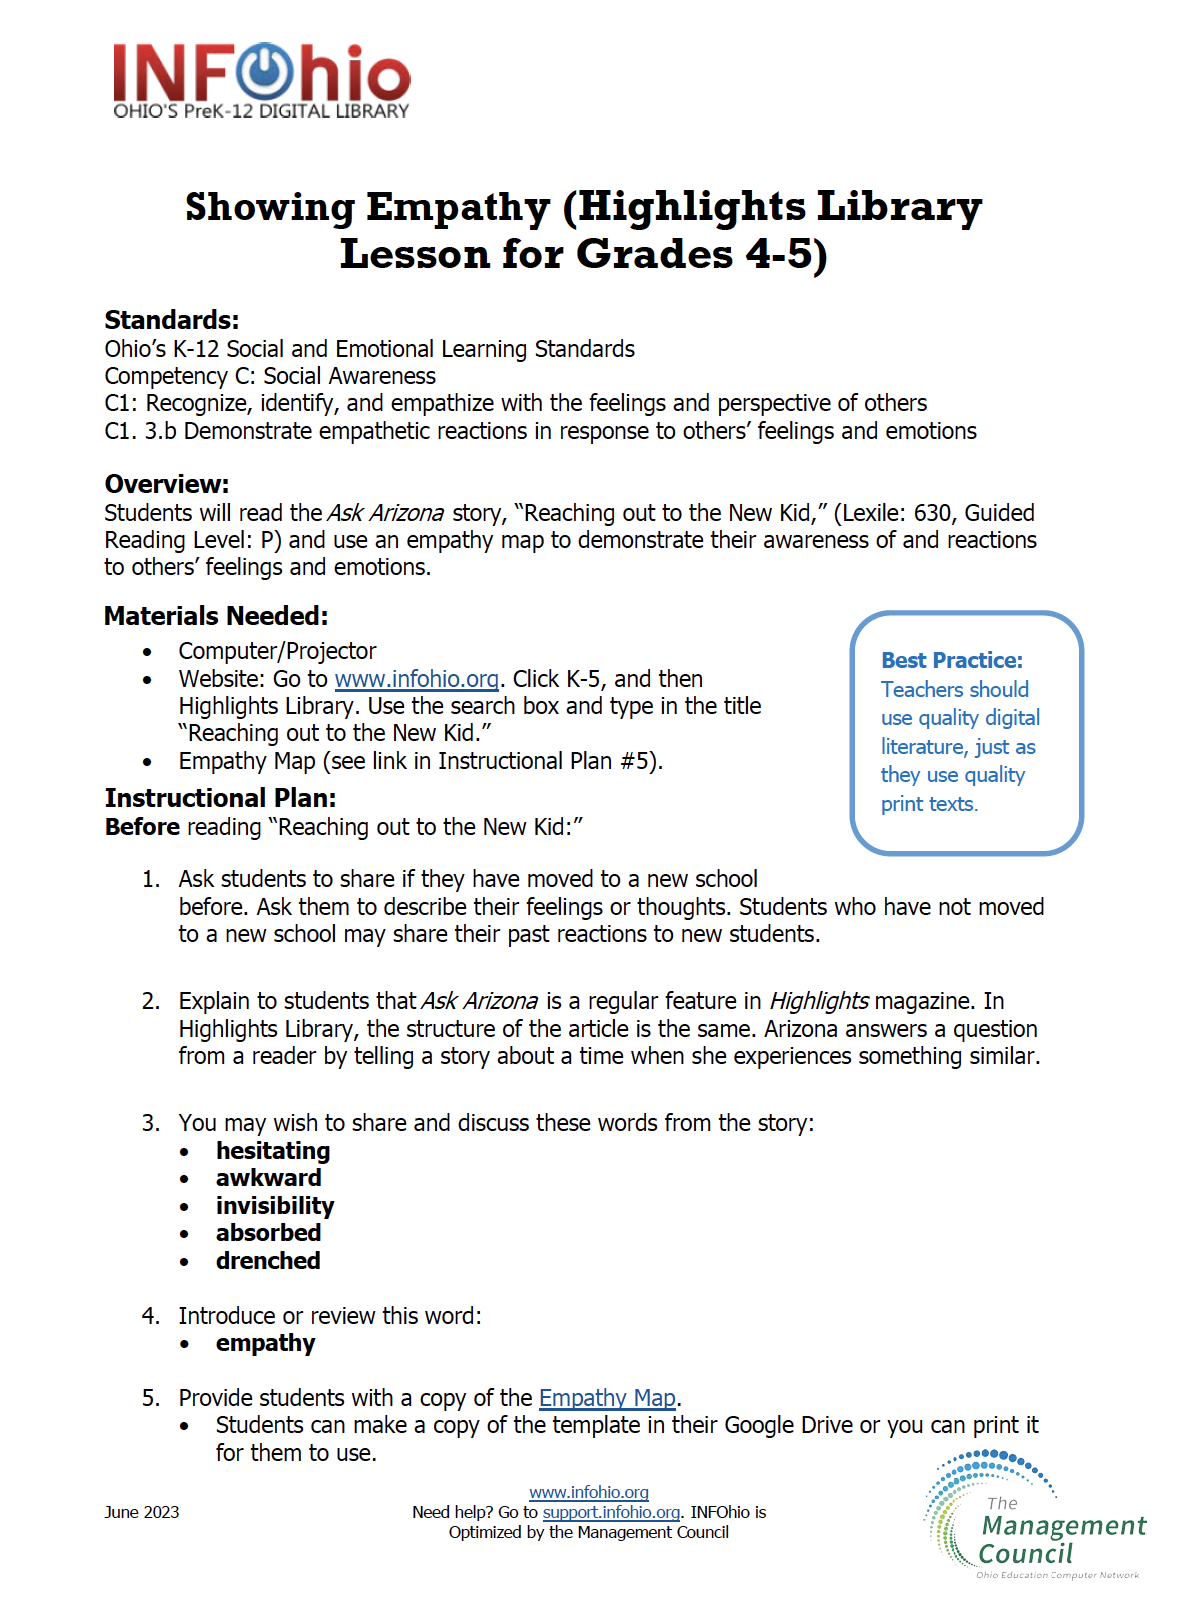 Showing Empathy (Highlights Library Lesson Grades 4-5)